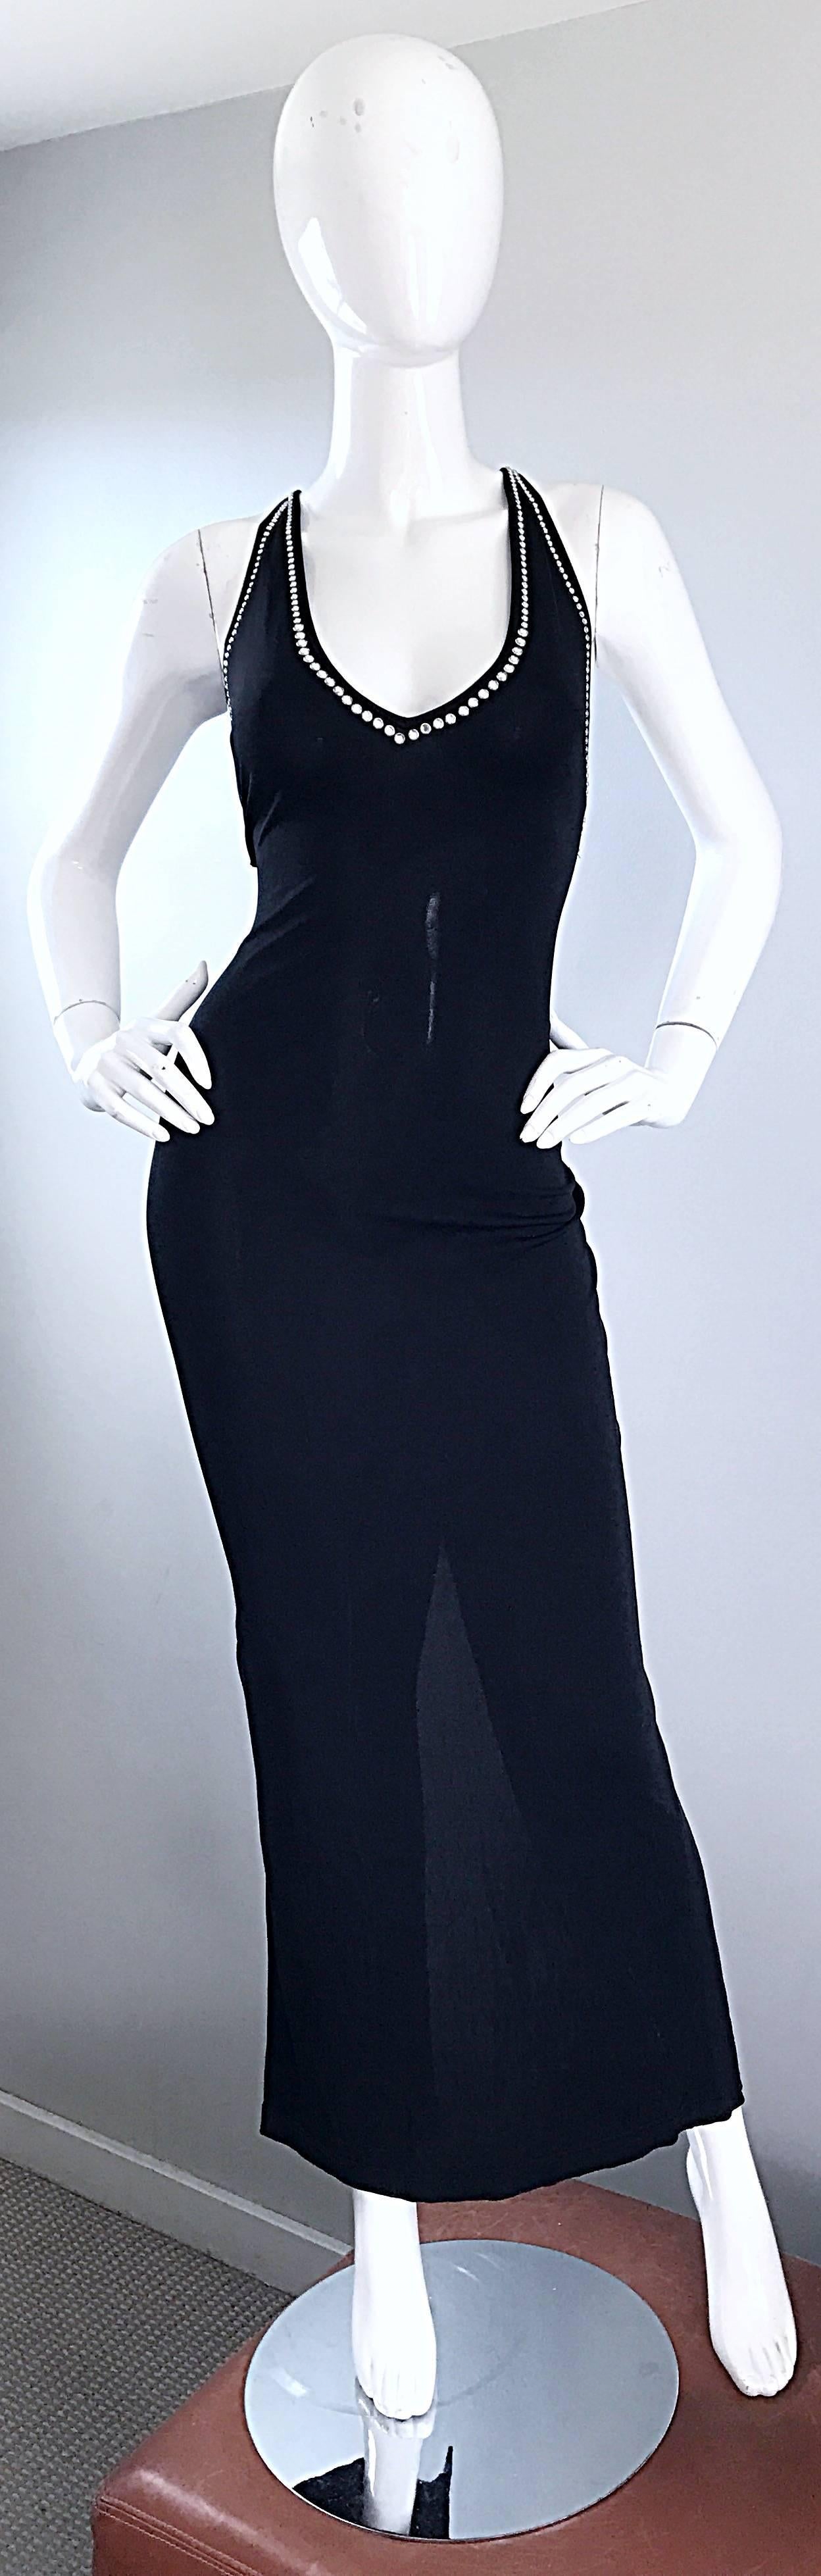 1990s Blumarine Anna Molinari Sexy Black Crstyal Studded Vintage Jersey Gown 90s For Sale 2